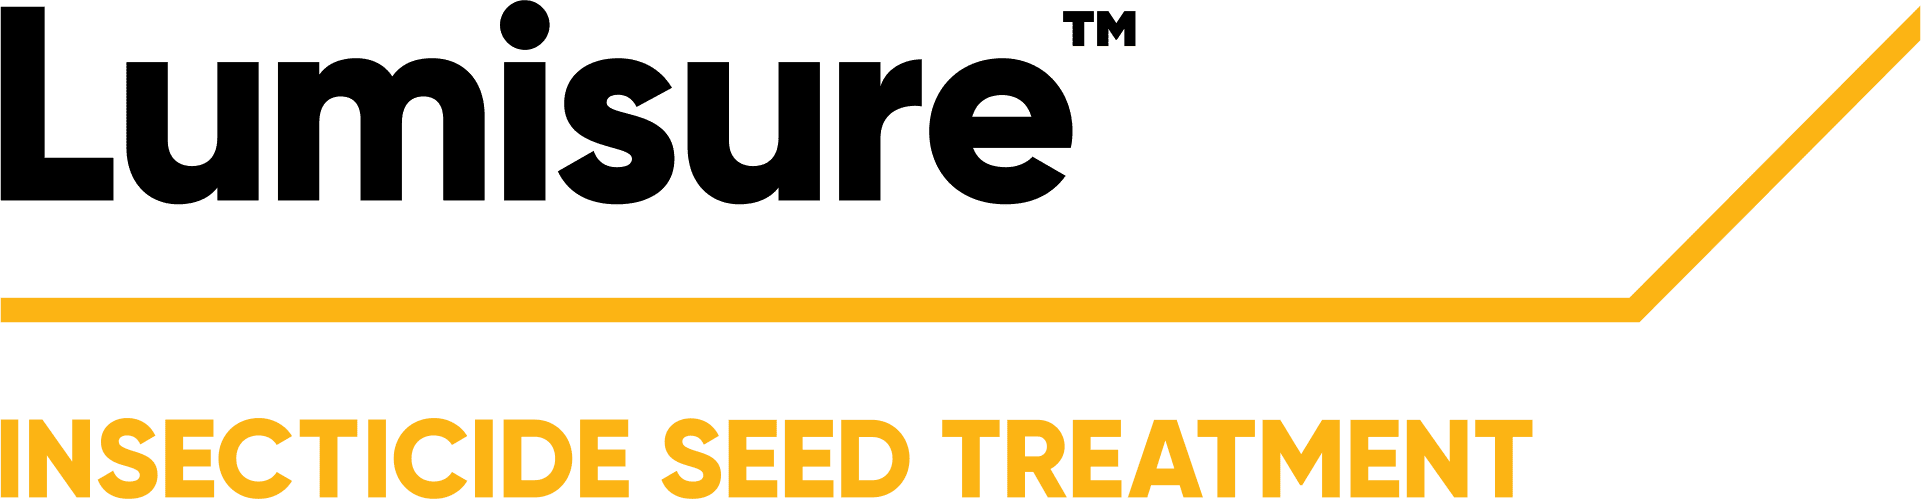 Lumisure™ Insecticide Seed Treatment